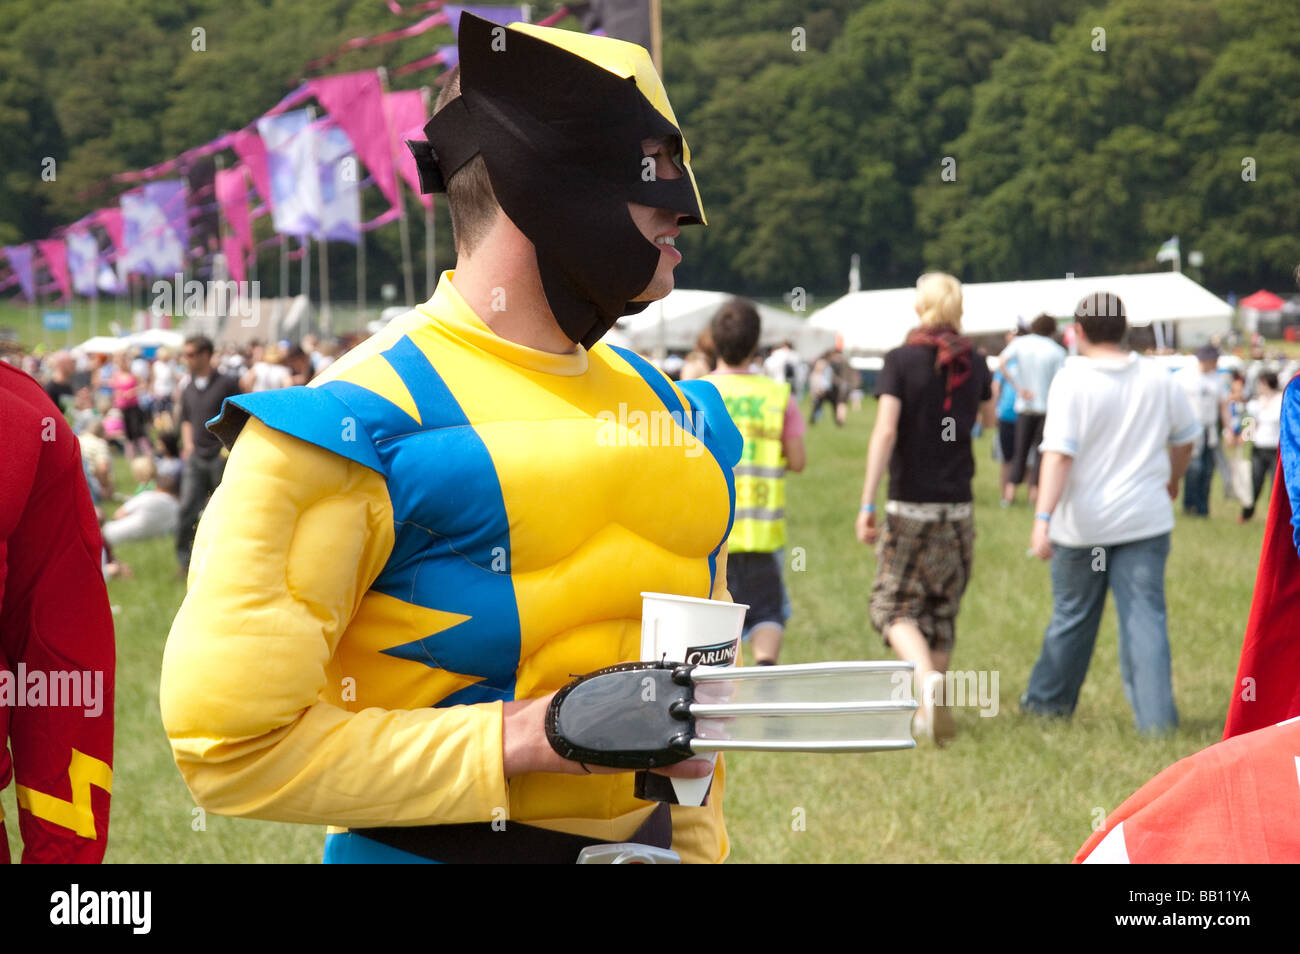 A festival goer dressed as Wolverine from the X-Men drinks from a paper cup at a music festival Stock Photo